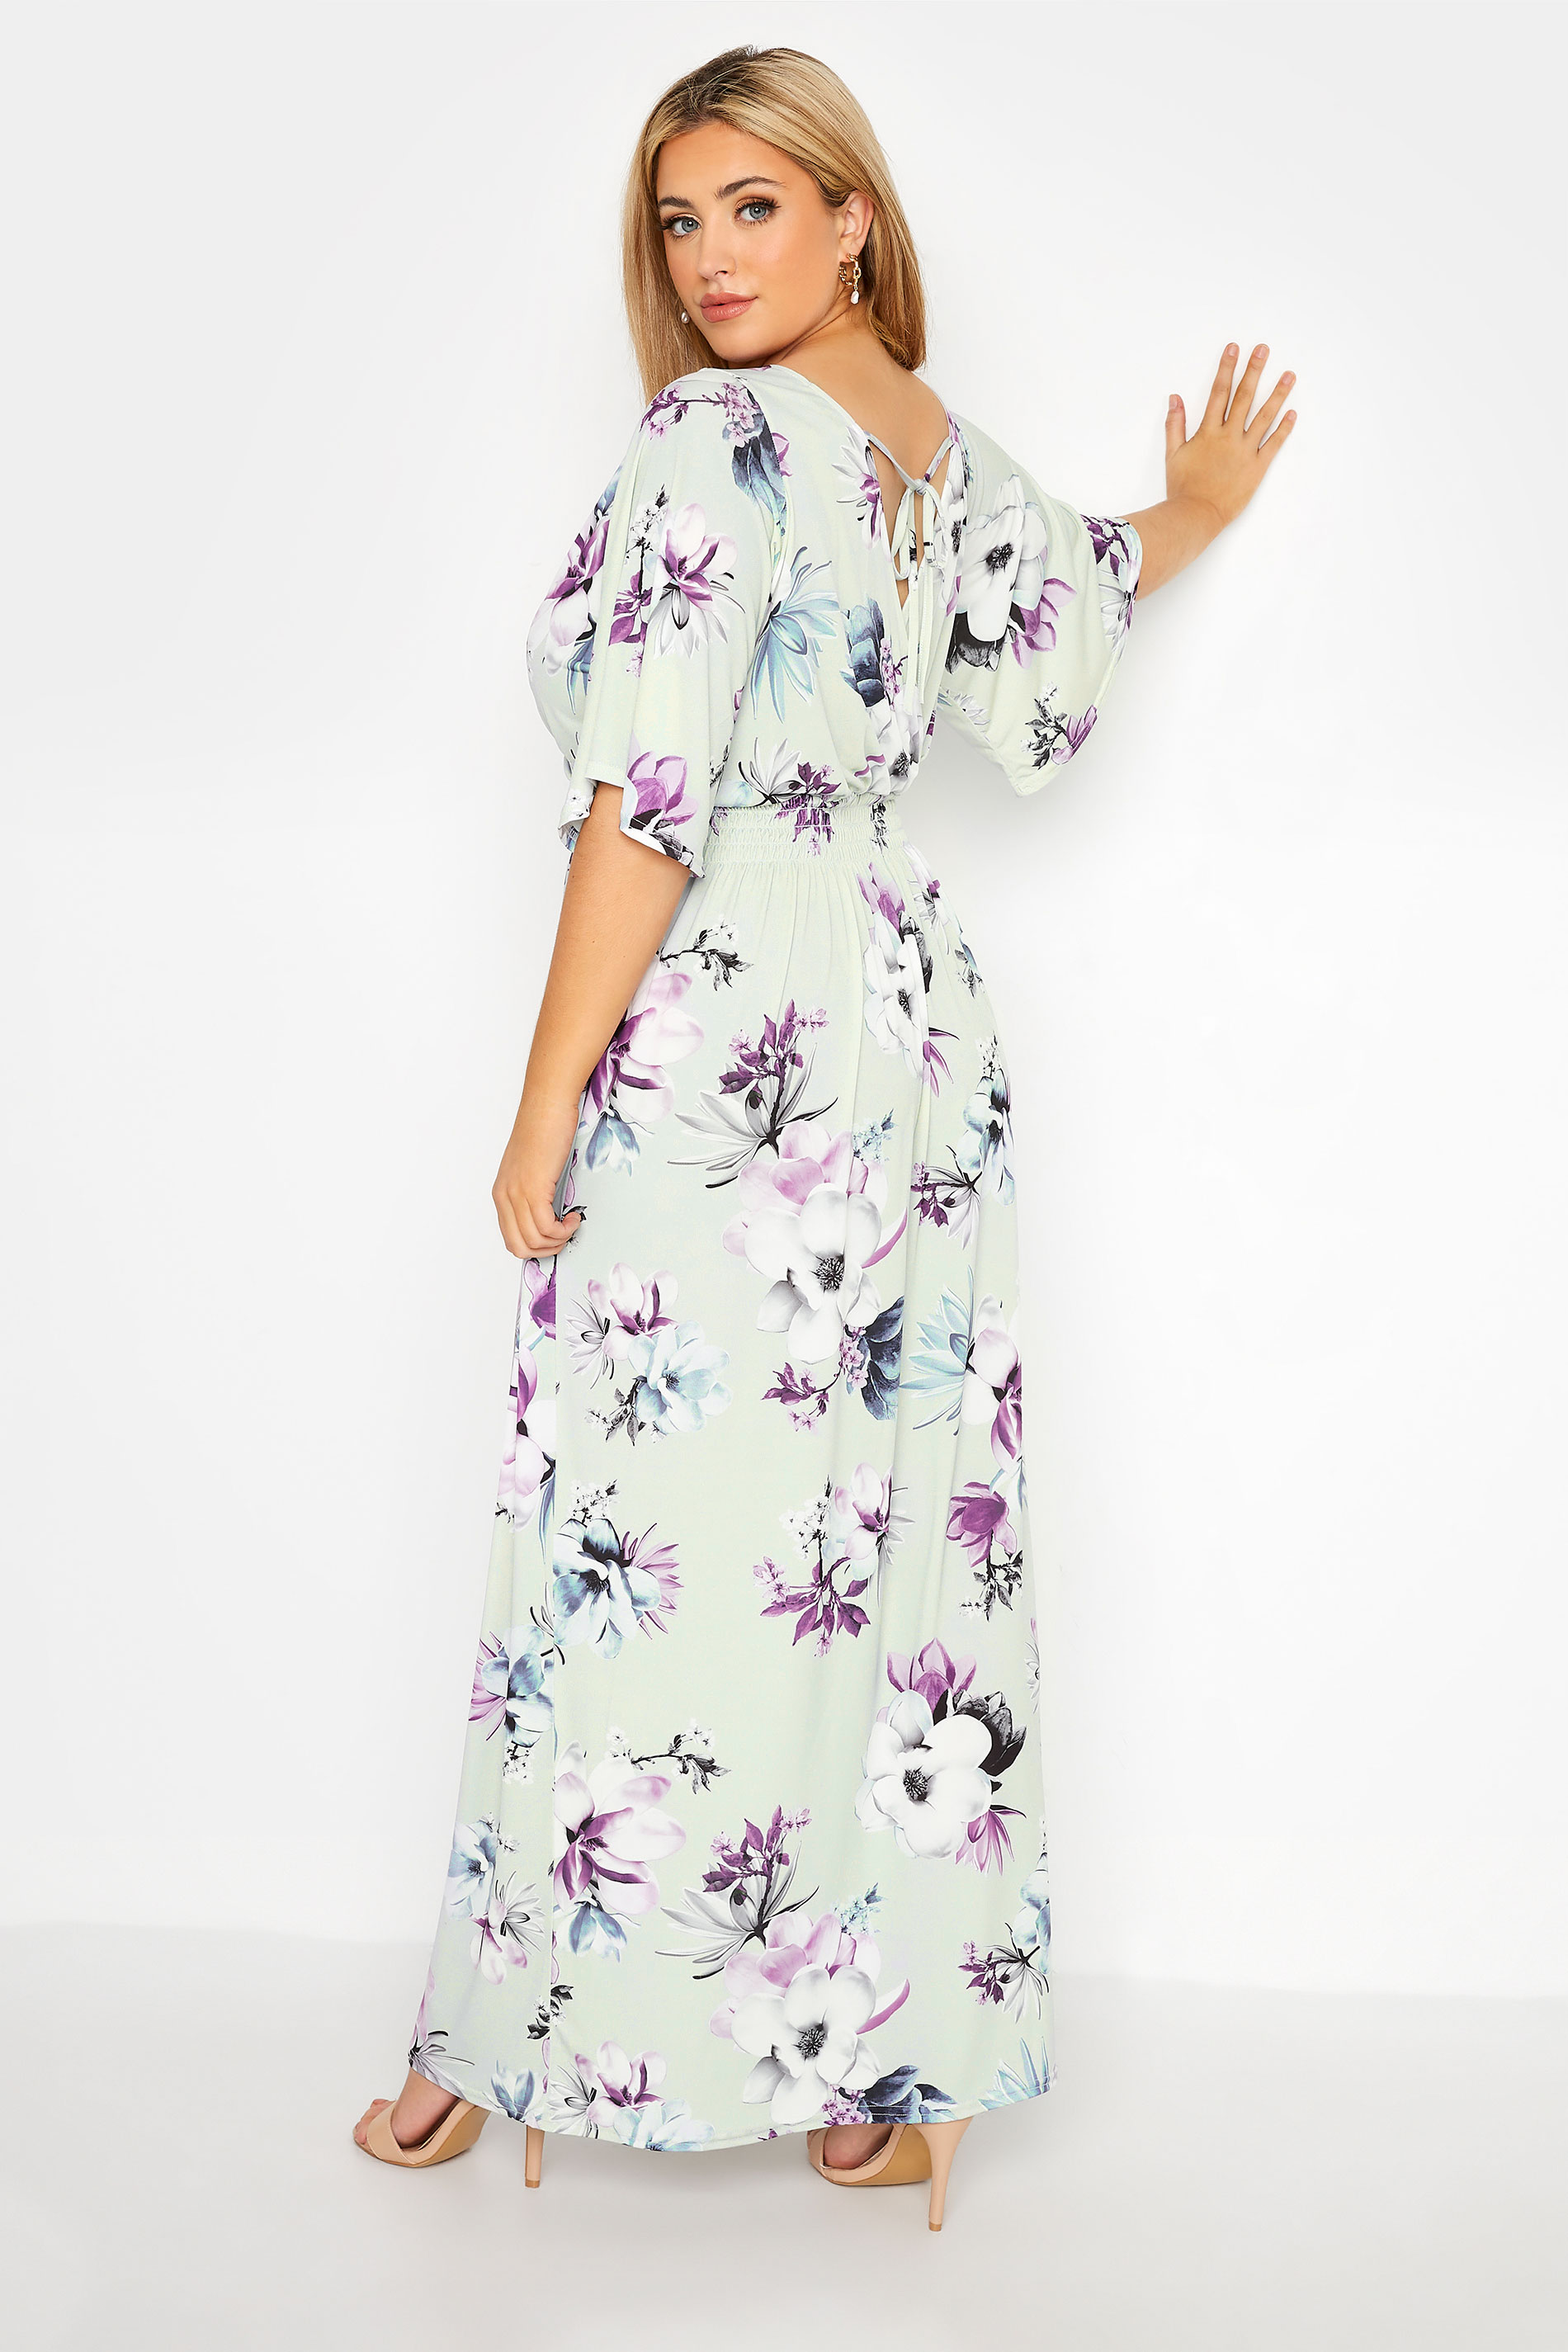 Robes Grande Taille Grande taille  Robes Longues | YOURS LONDON - Robe Cache-Coeur Floral Verte Pastel Maxi - HI29691